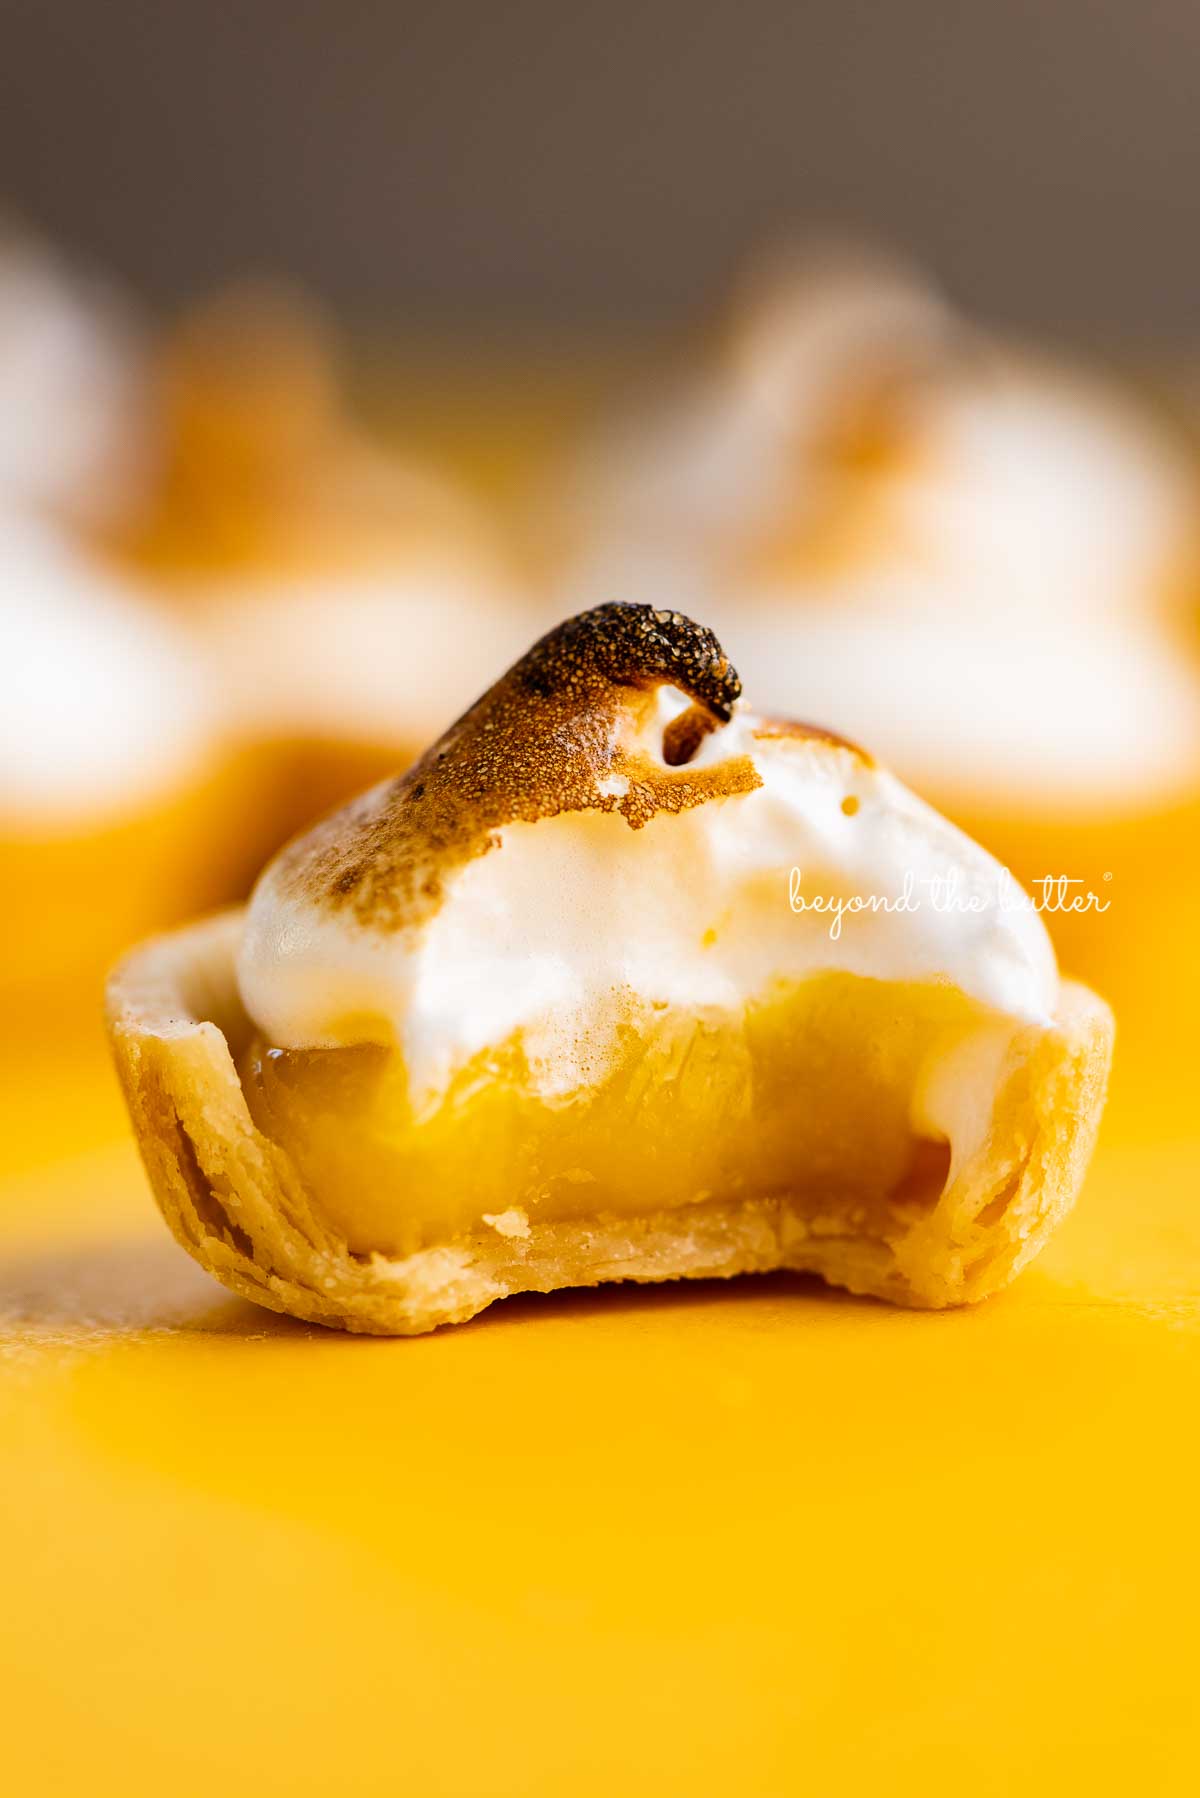 Mini lemon meringue pie with bite taken out surrounded by other mini pies on a yellow background | © Beyond the Butter@